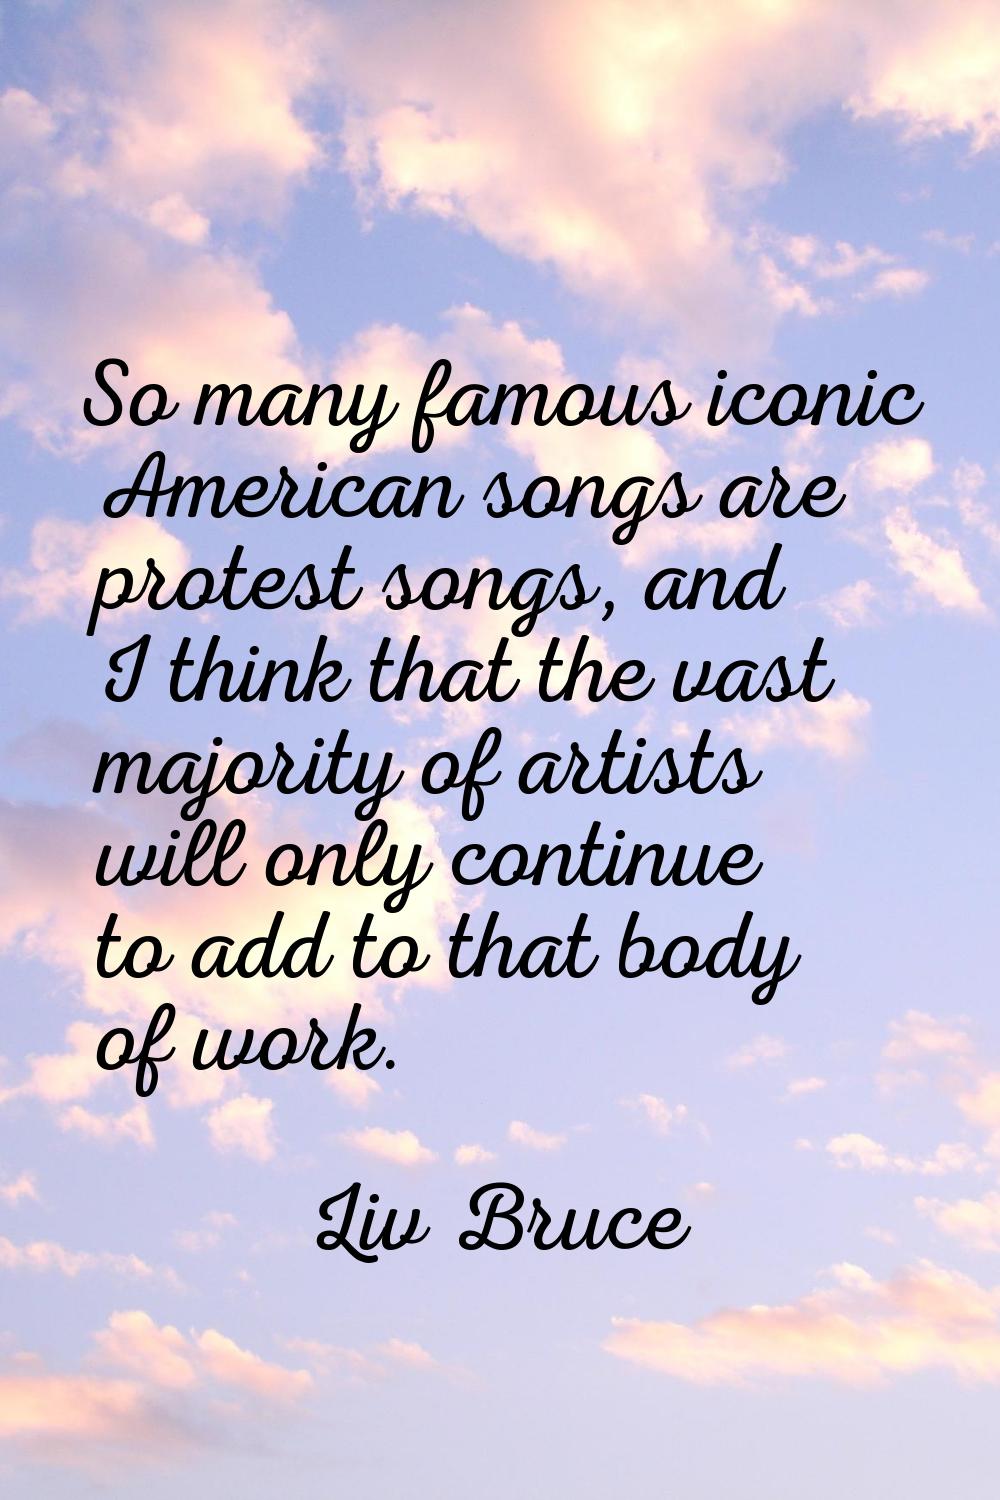 So many famous iconic American songs are protest songs, and I think that the vast majority of artis